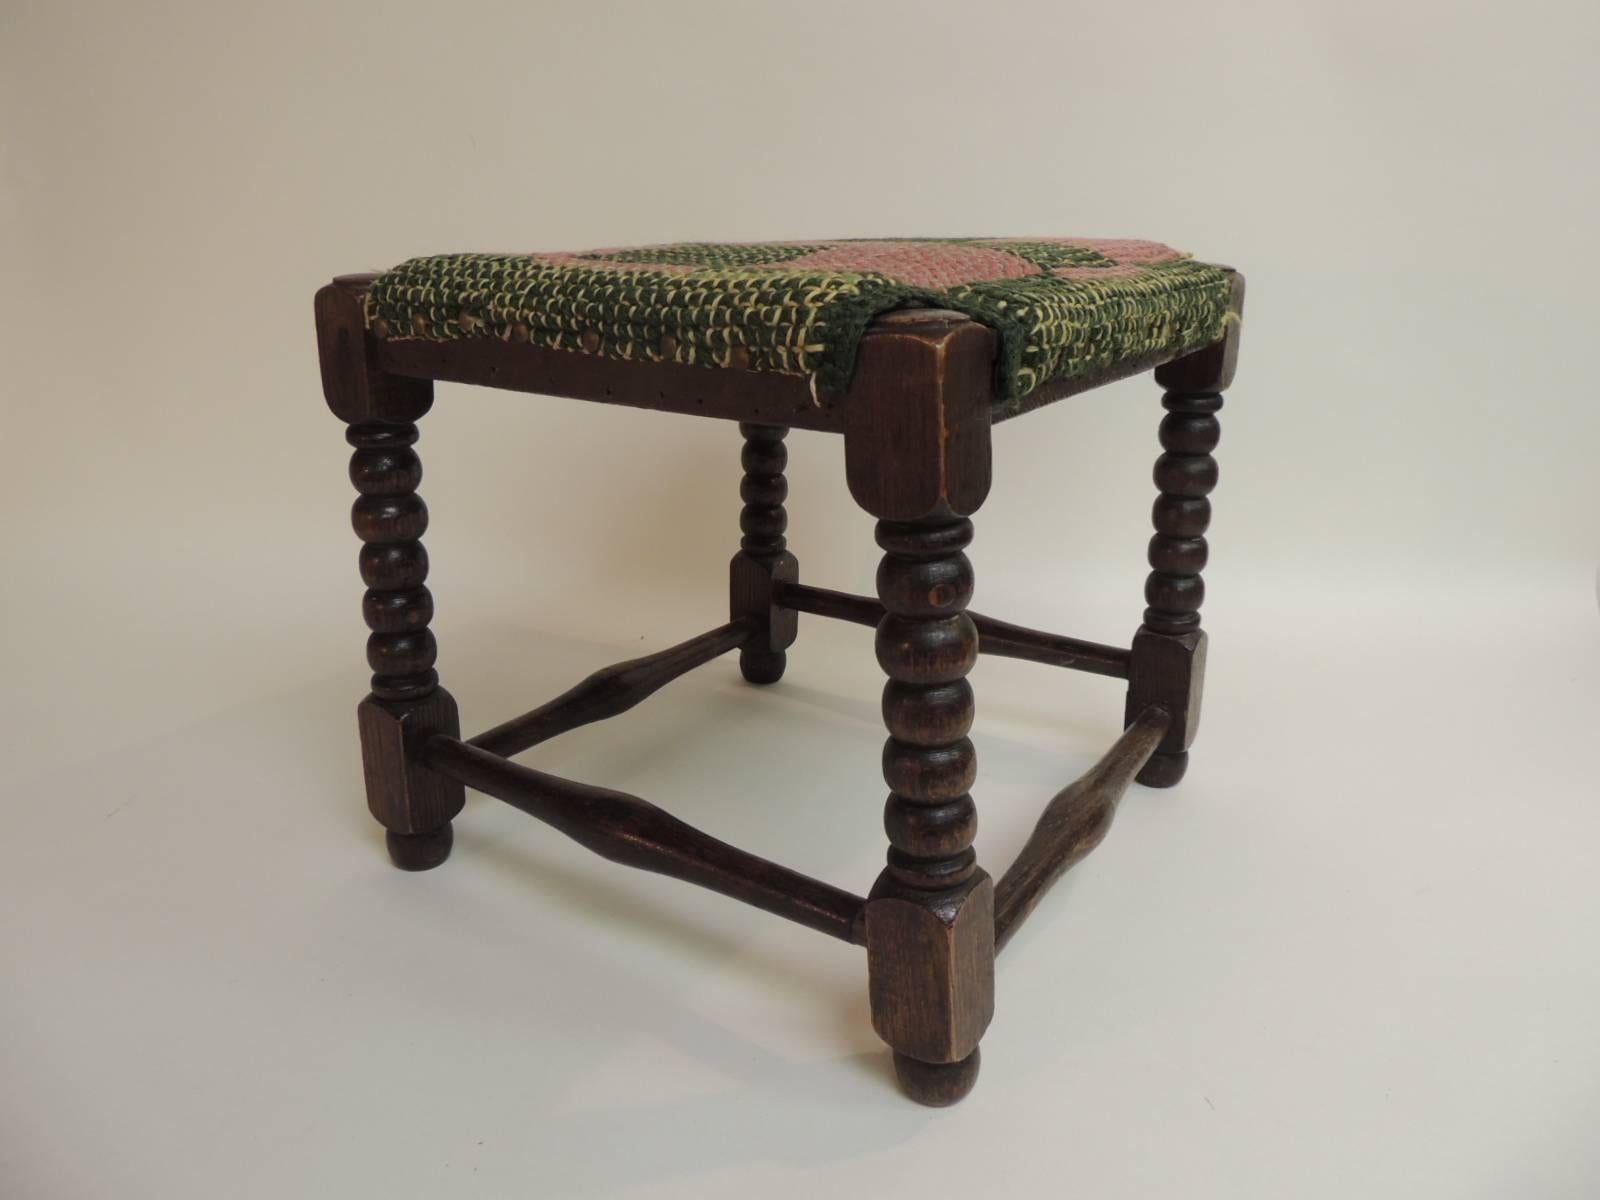 Country Antique Square William and Mary Style Turned Wood Legs Stool